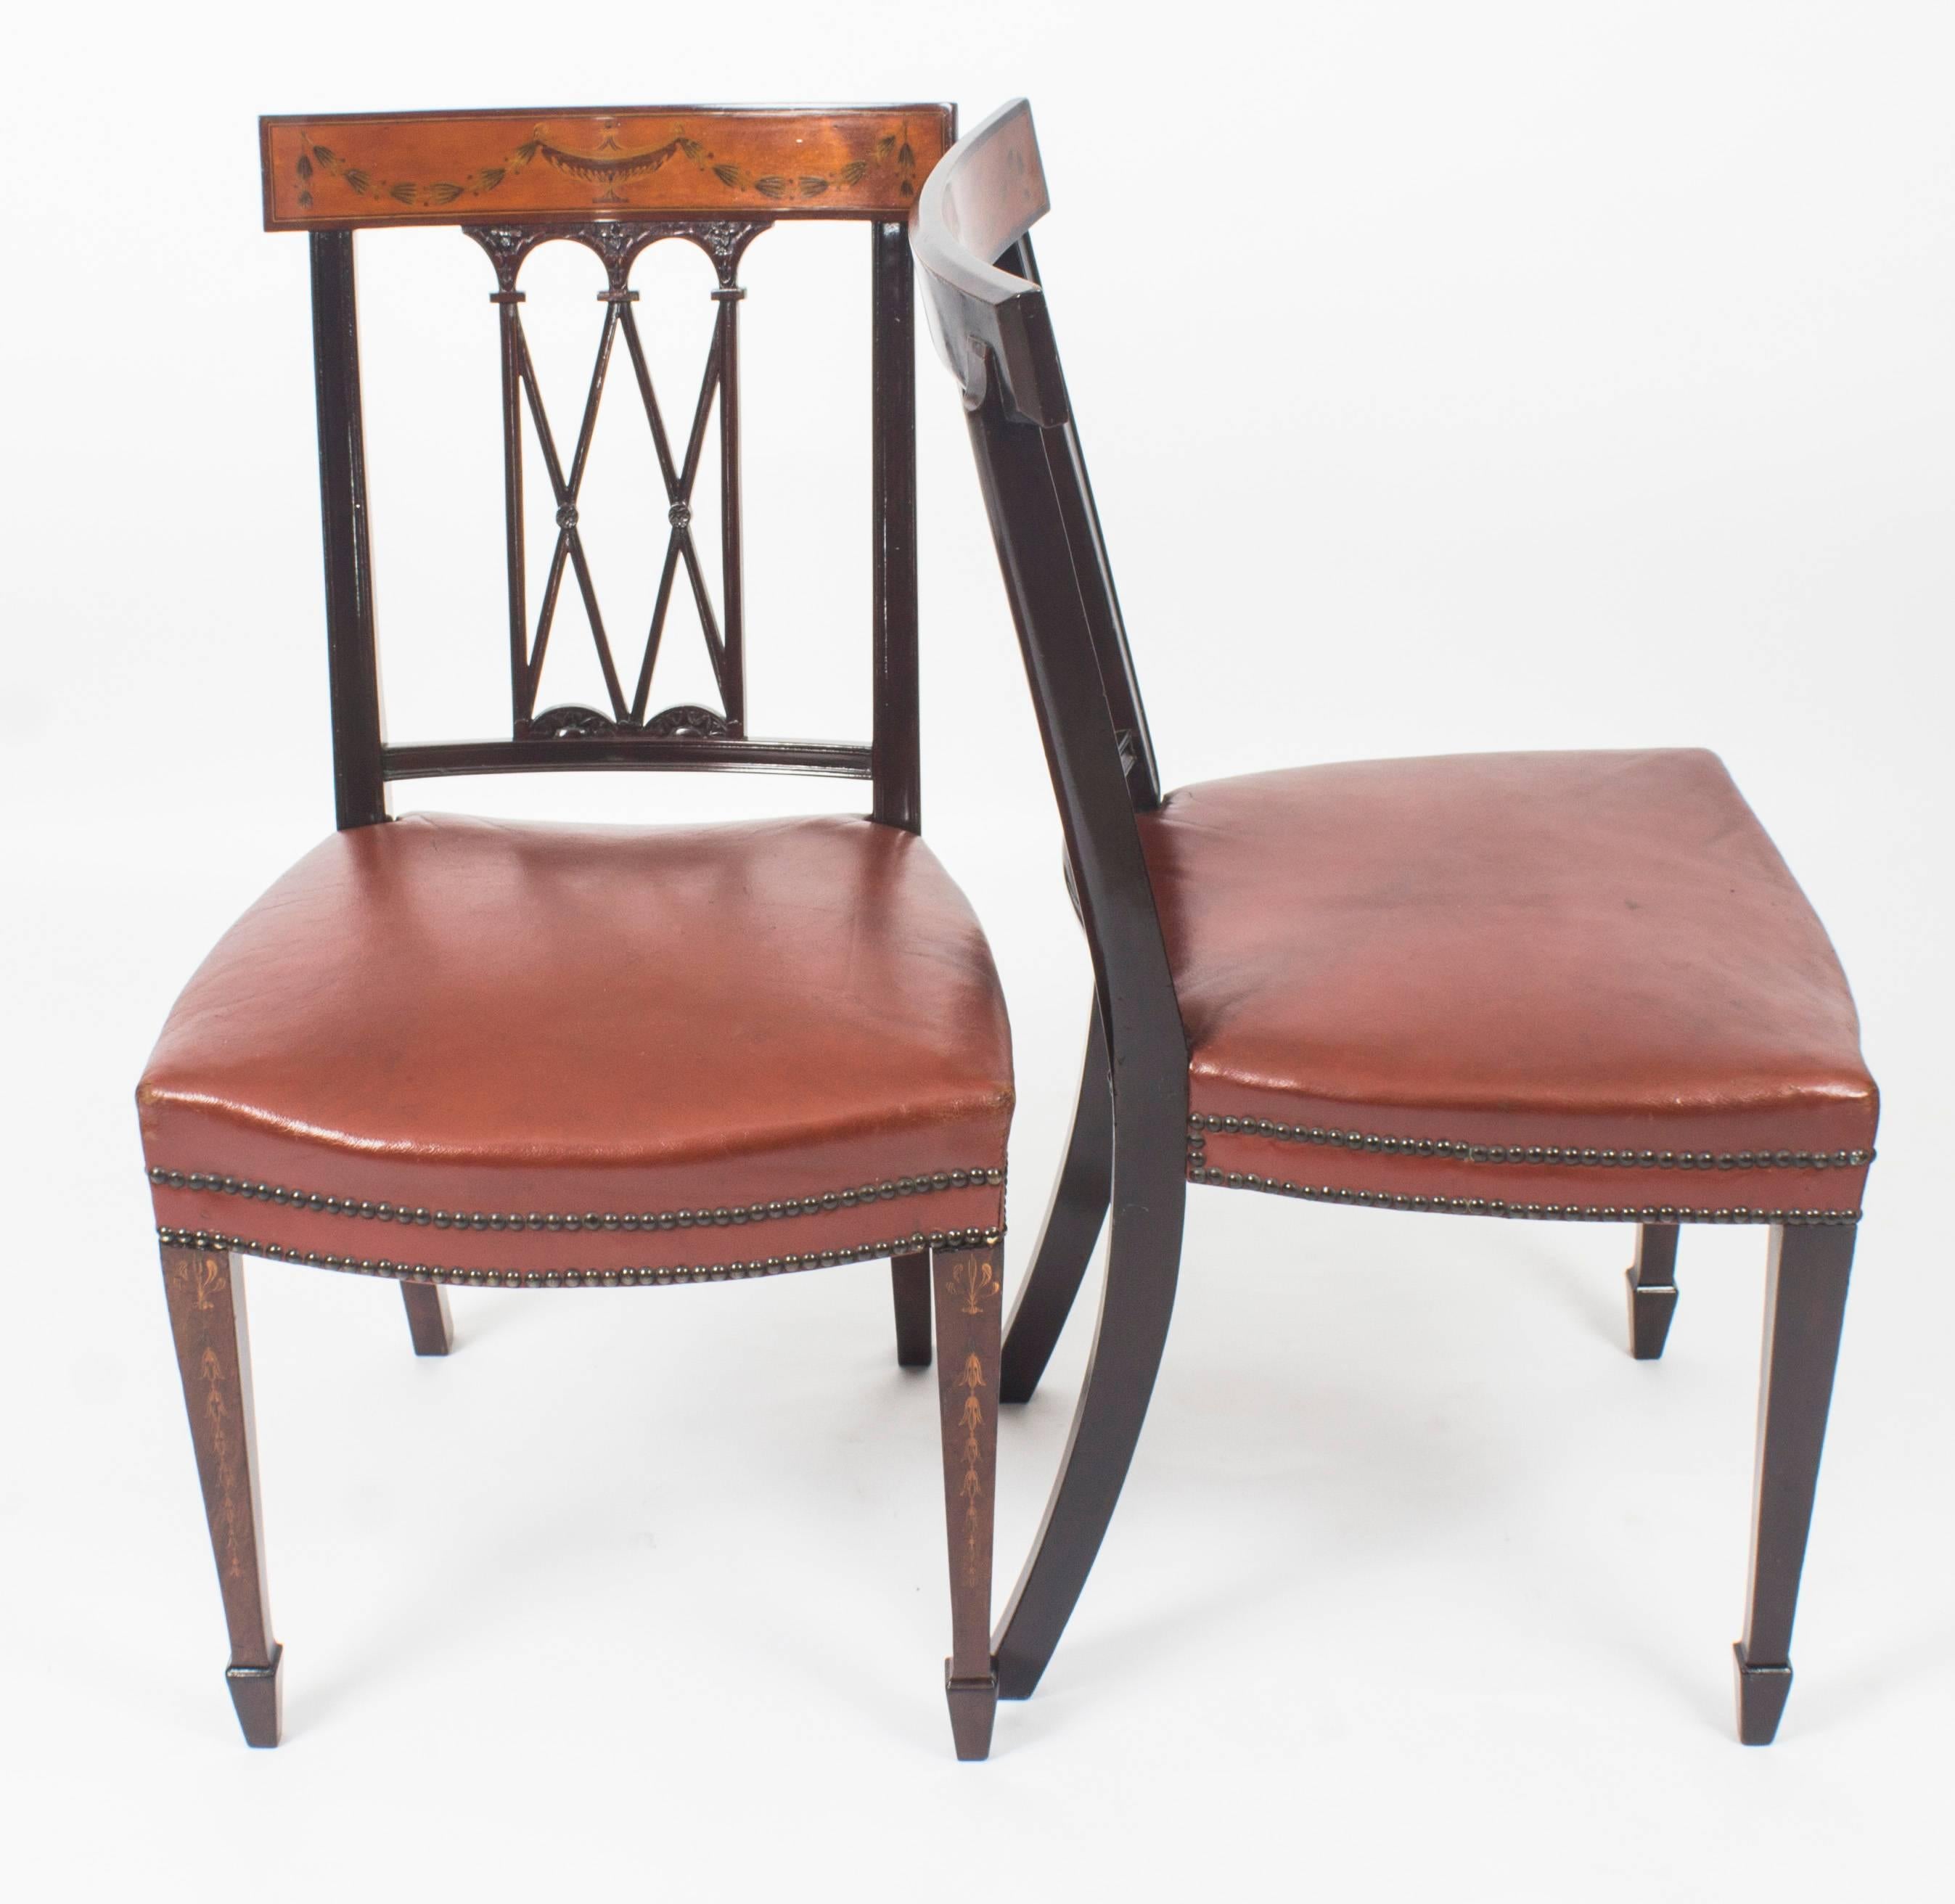 Late 19th Century Antique Set 12 Victorian Dining Chairs by Edwards & Roberts, 19th Century